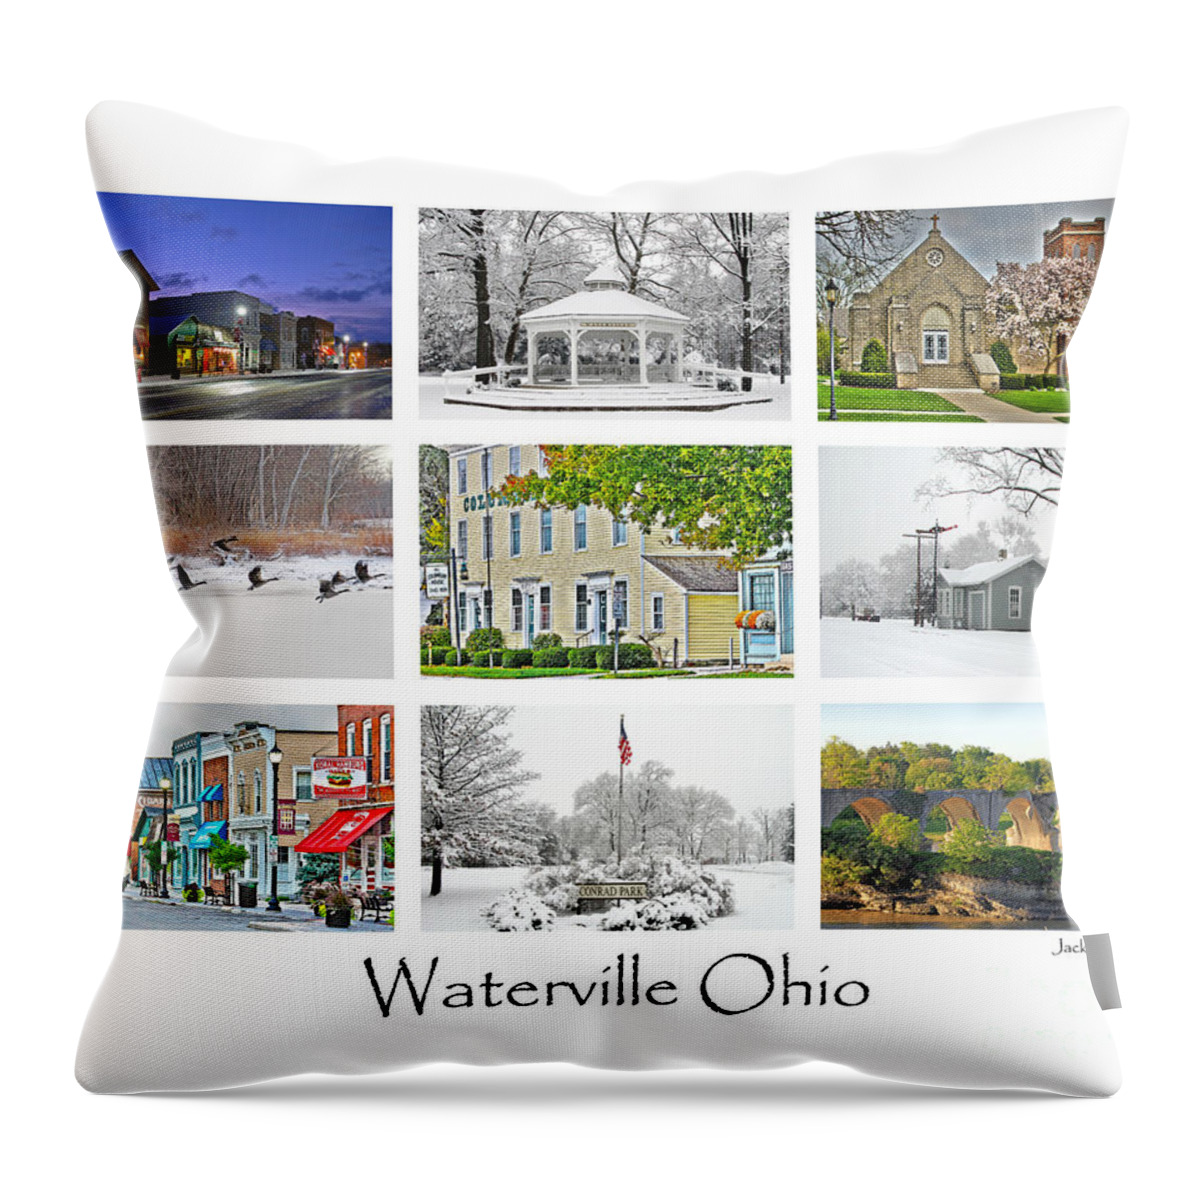 Waterviile Ohio Collection Throw Pillow featuring the photograph Waterville Ohio by Jack Schultz